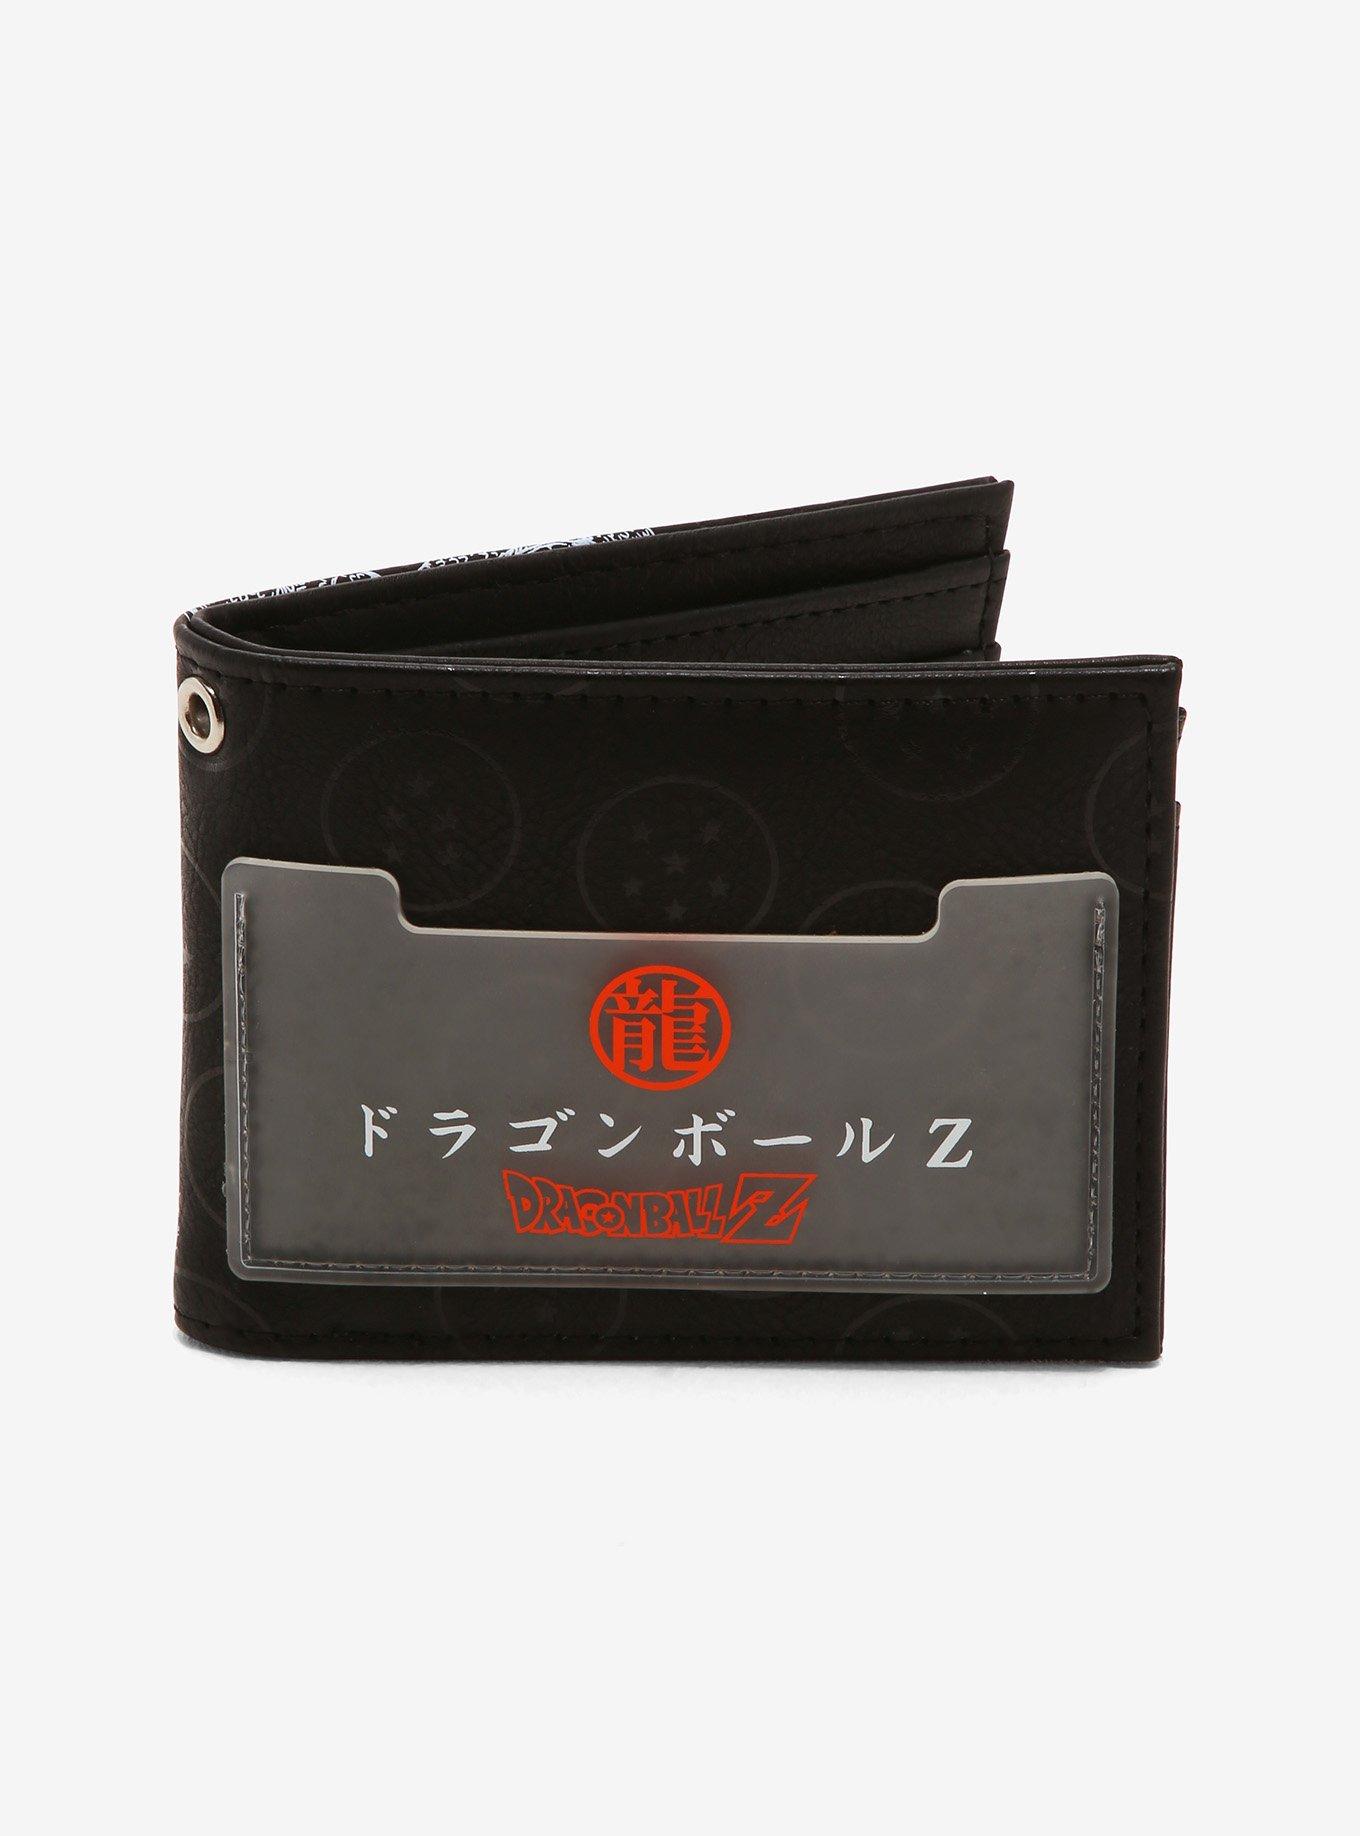 OFF-WHITE Quote Wallet FOR MONEY Orange Black in Leather - US